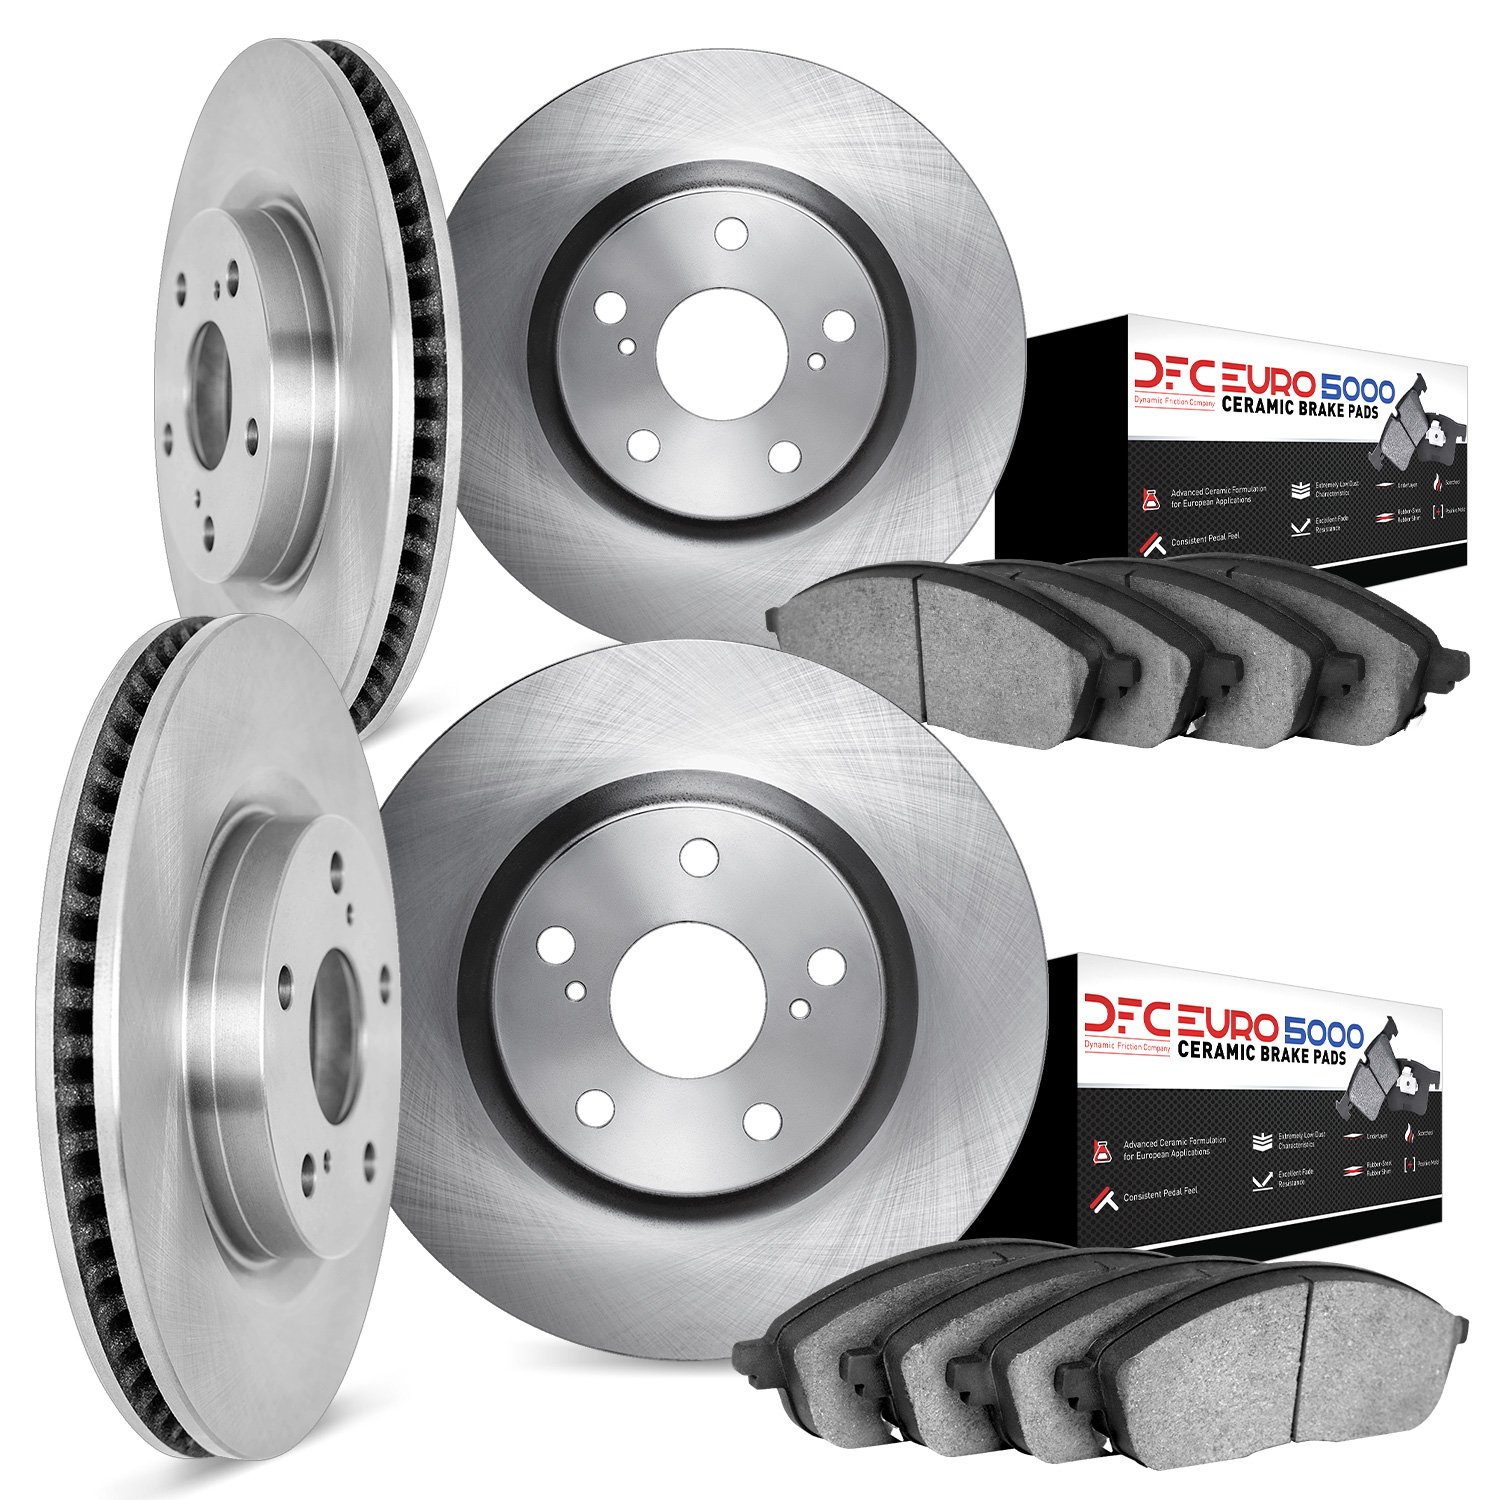 6604-31026 Brake Rotors w/5000 Euro Ceramic Brake Pads, 2011-2016 BMW, Position: Front and Rear